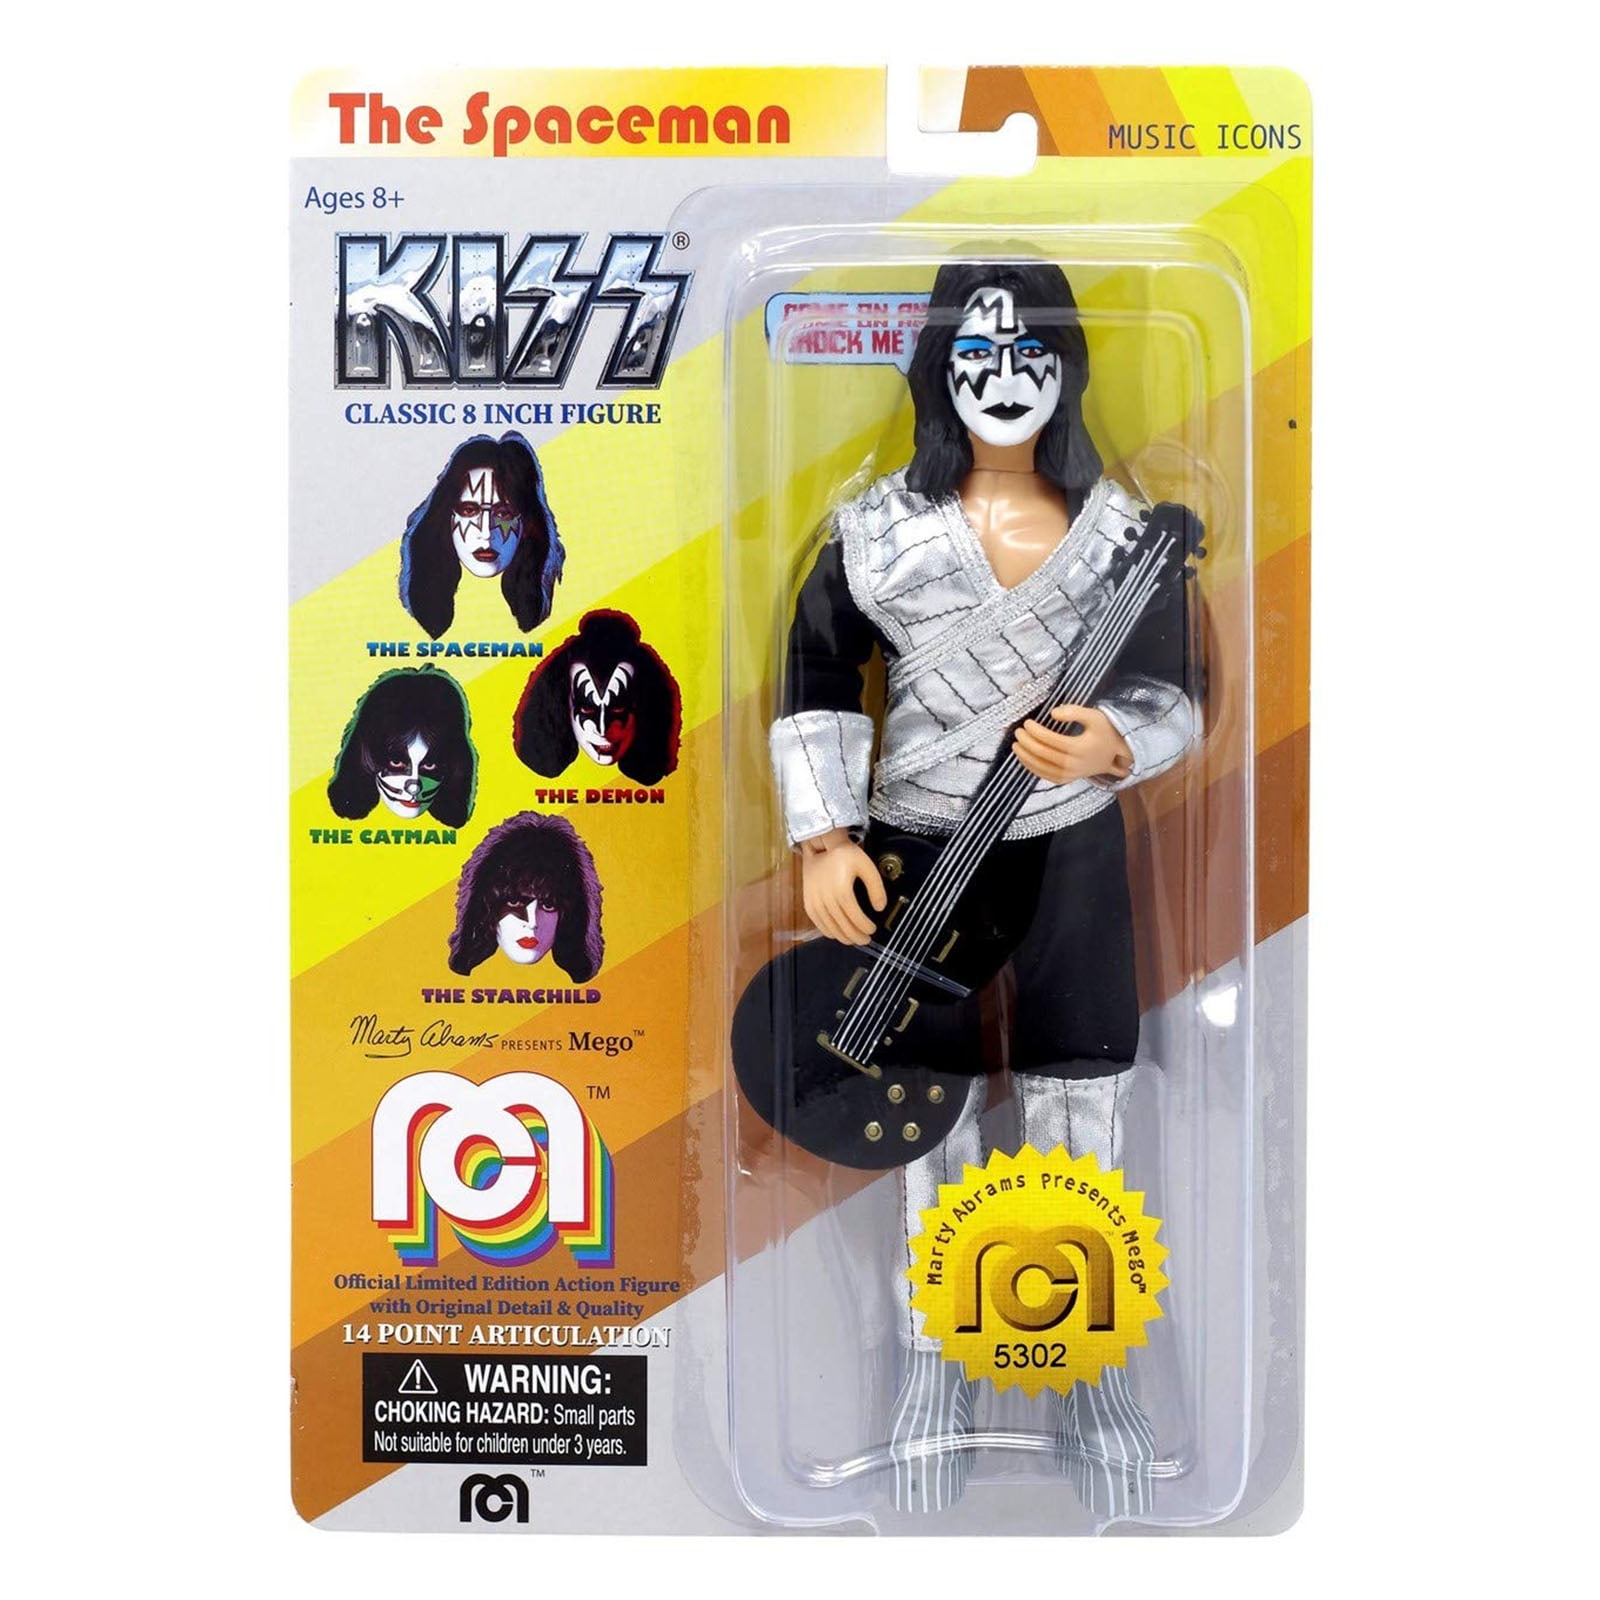 Spaceman  2012 Series 2 KISS 12inch FTC retro mego action figures LOOSE 